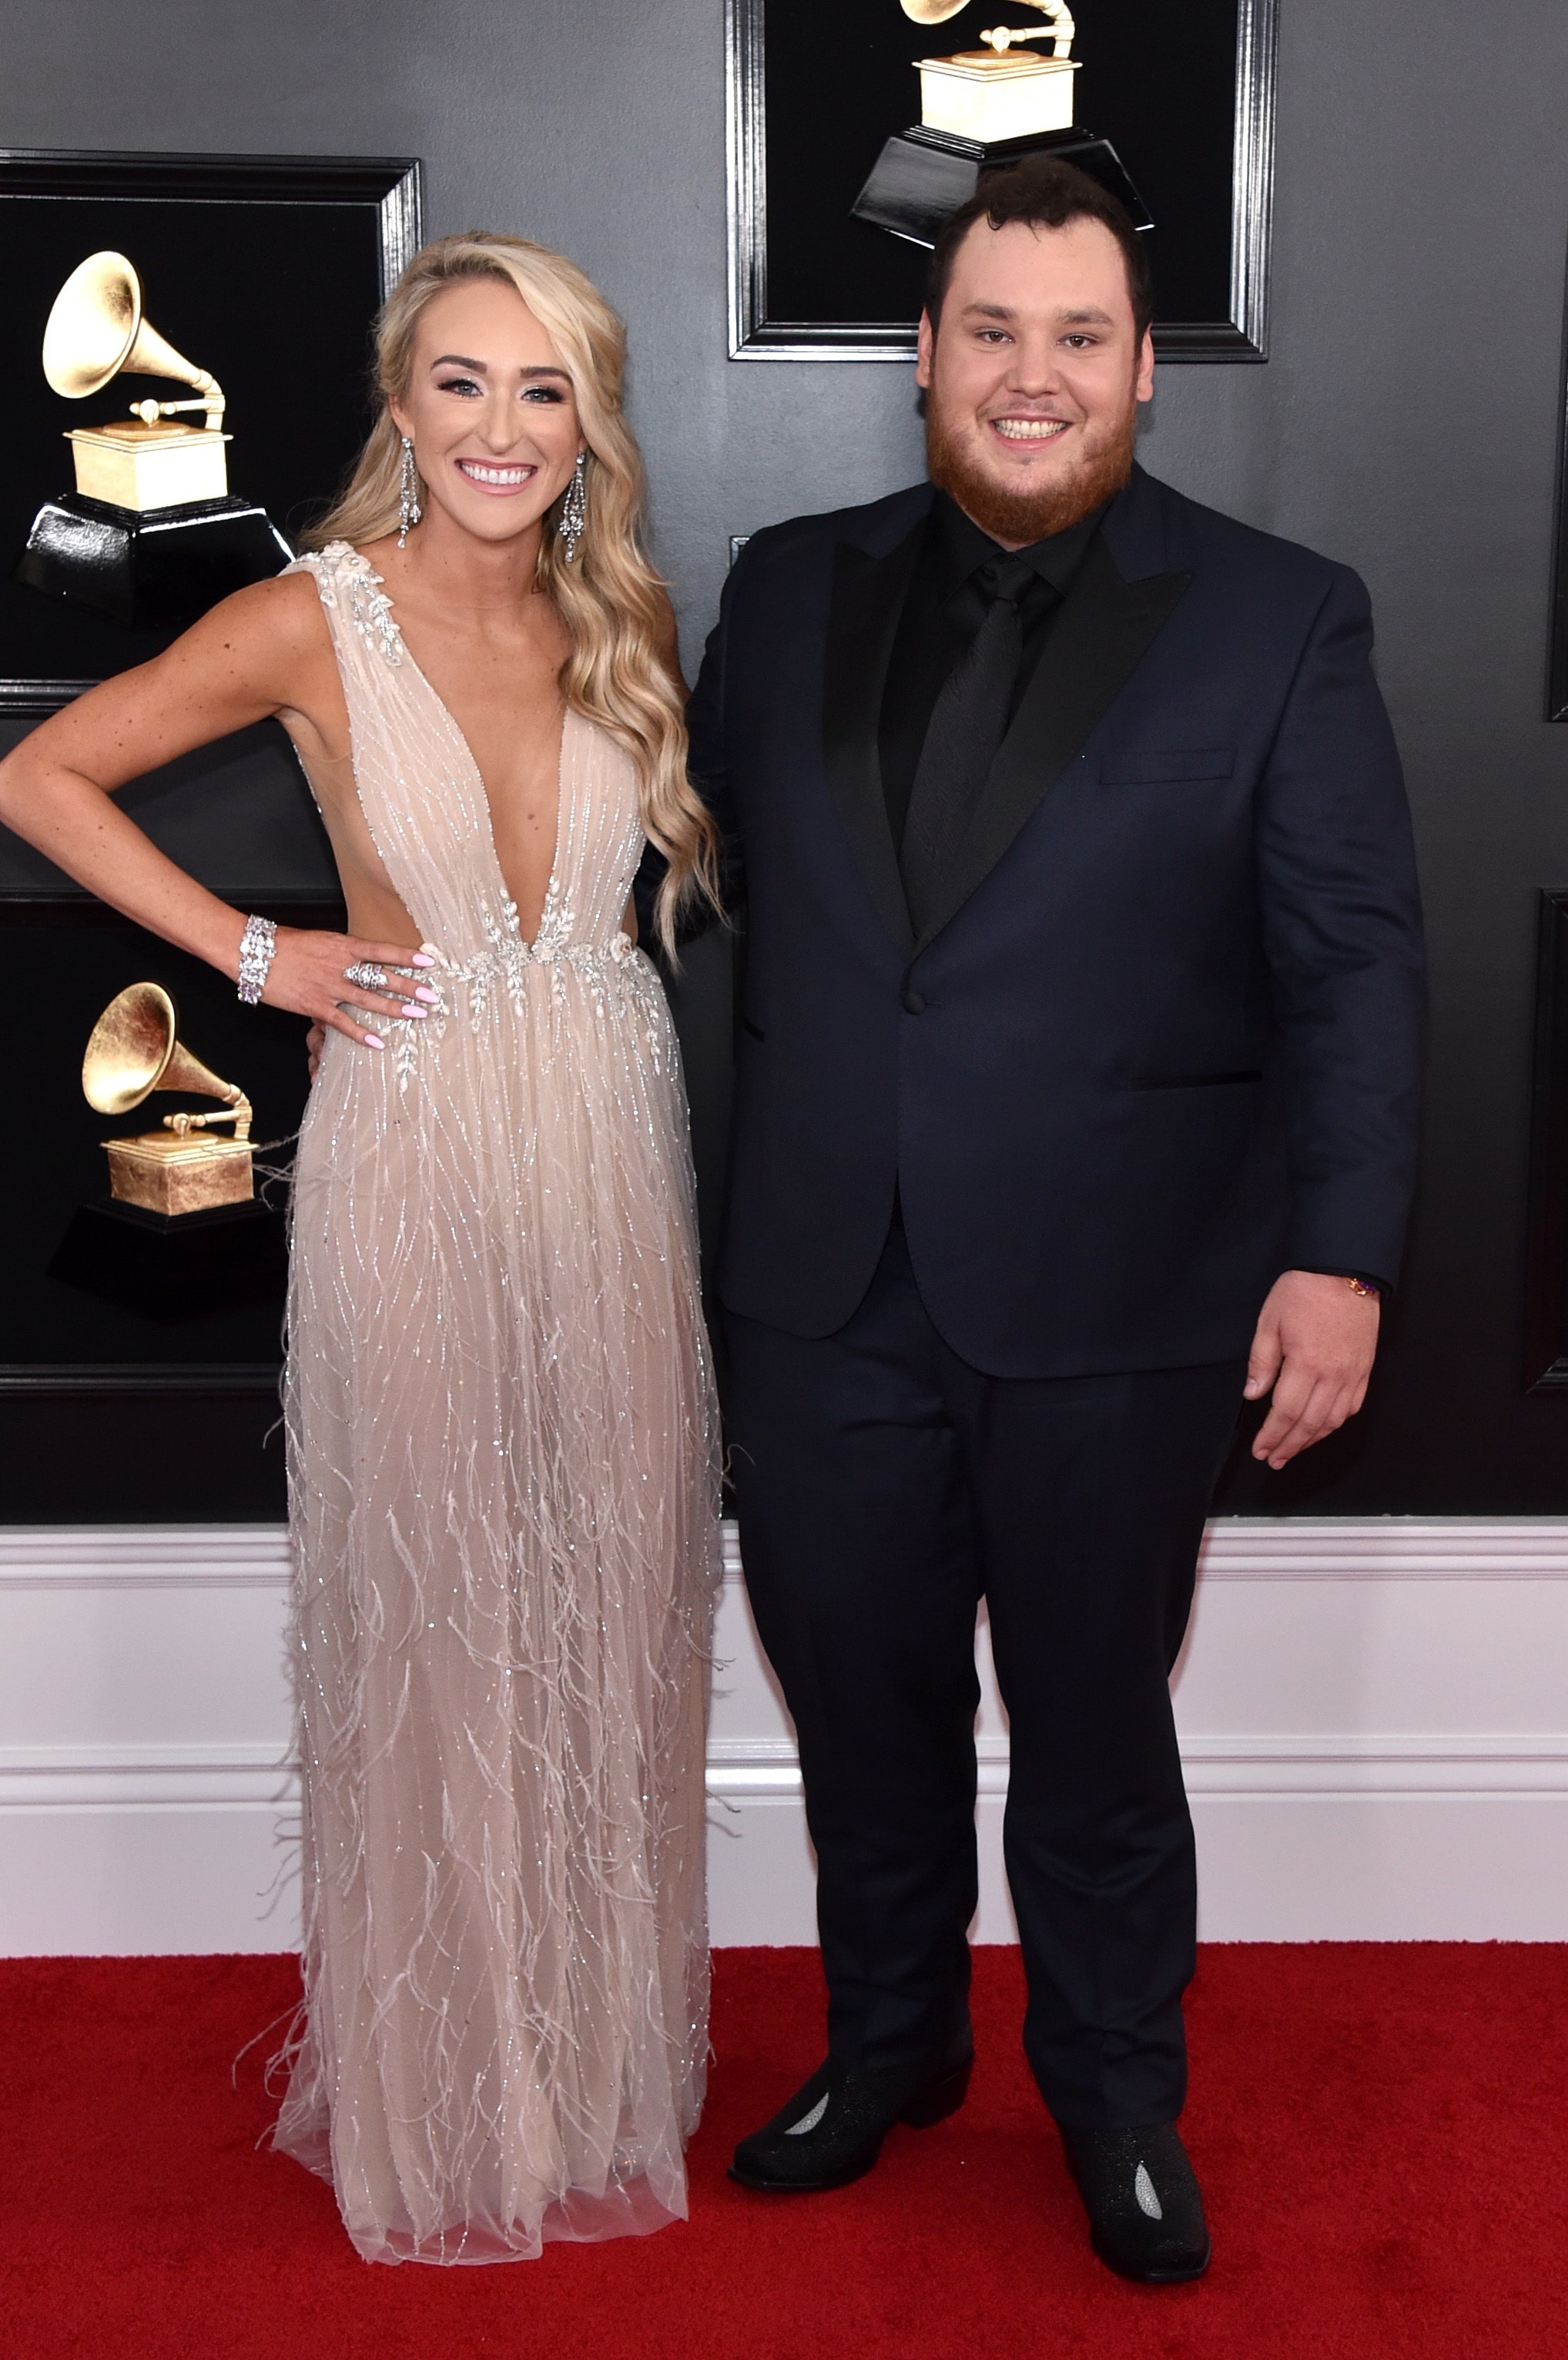 LOS ANGELES, CA - FEBRUARY 10: Nicole Hocking (L) and Luke Combs attend the 61st Annual GRAMMY Awards at Staples Center on February 10, 2019 in Los Angeles, California. (Photo by John Shearer/Getty Images for The Recording Academy)